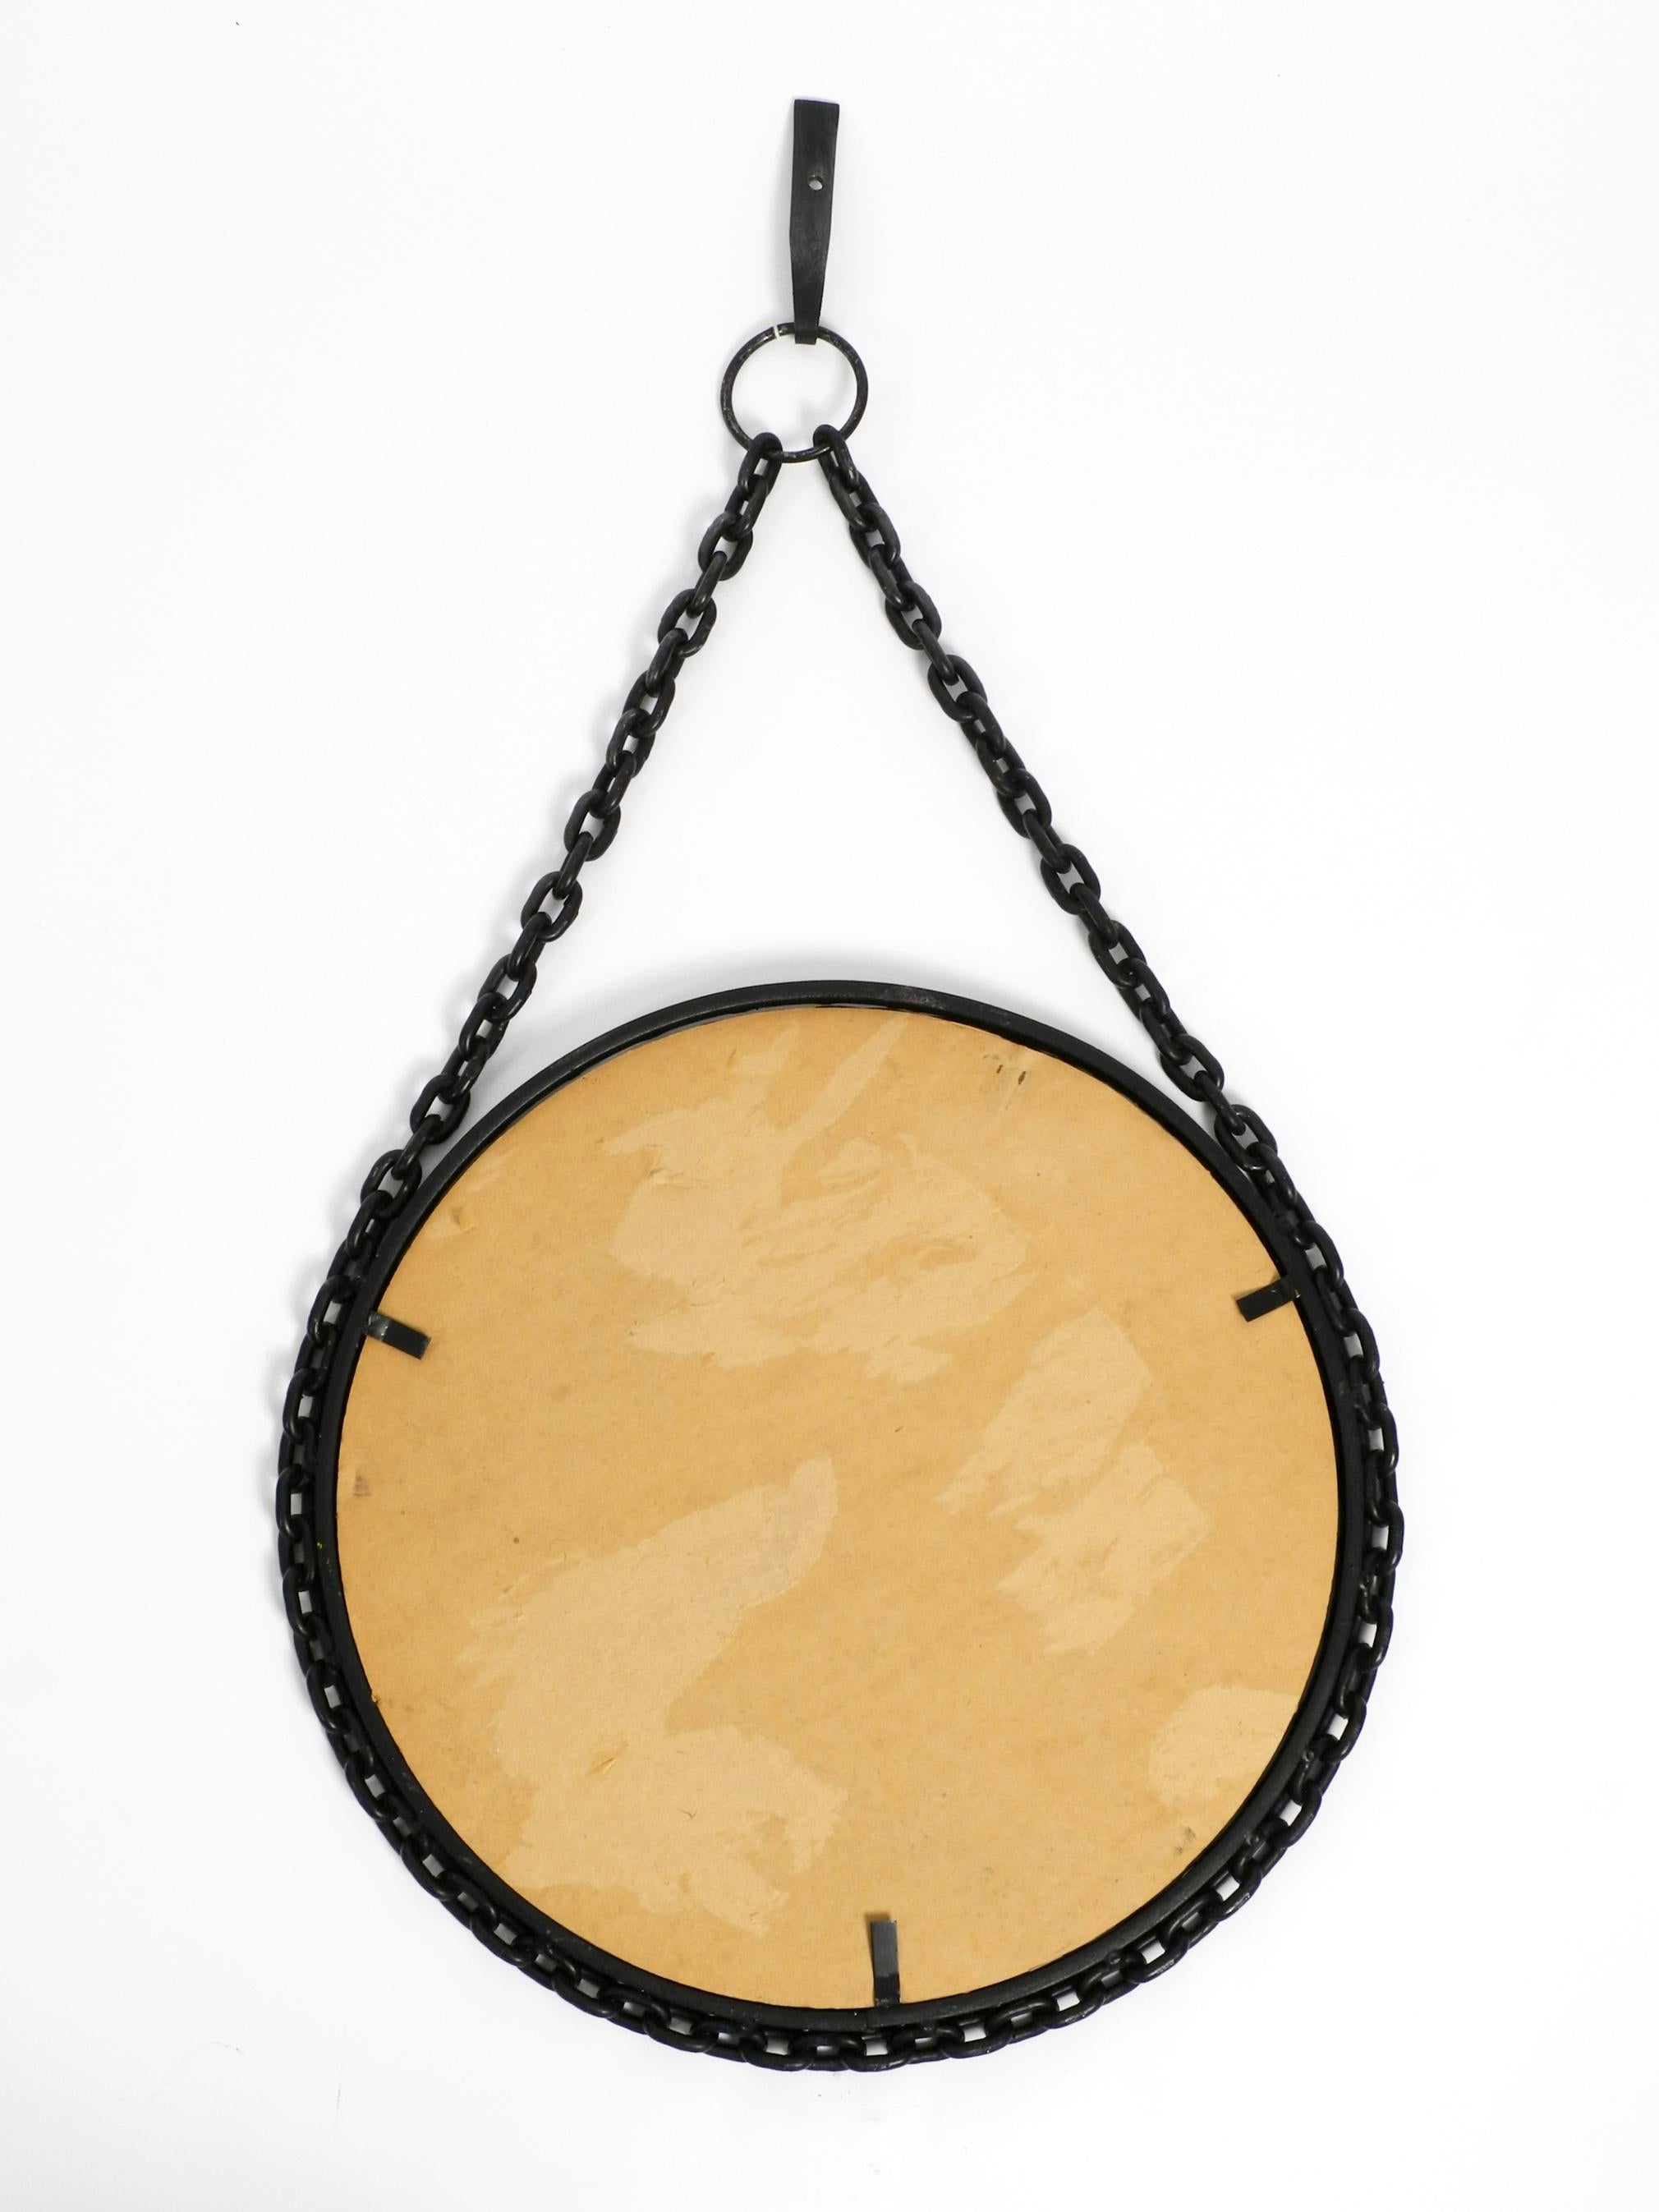 Heavy Brutalist Mid Century Design Wall Mirror with Wrought Iron Frame and Chain For Sale 5